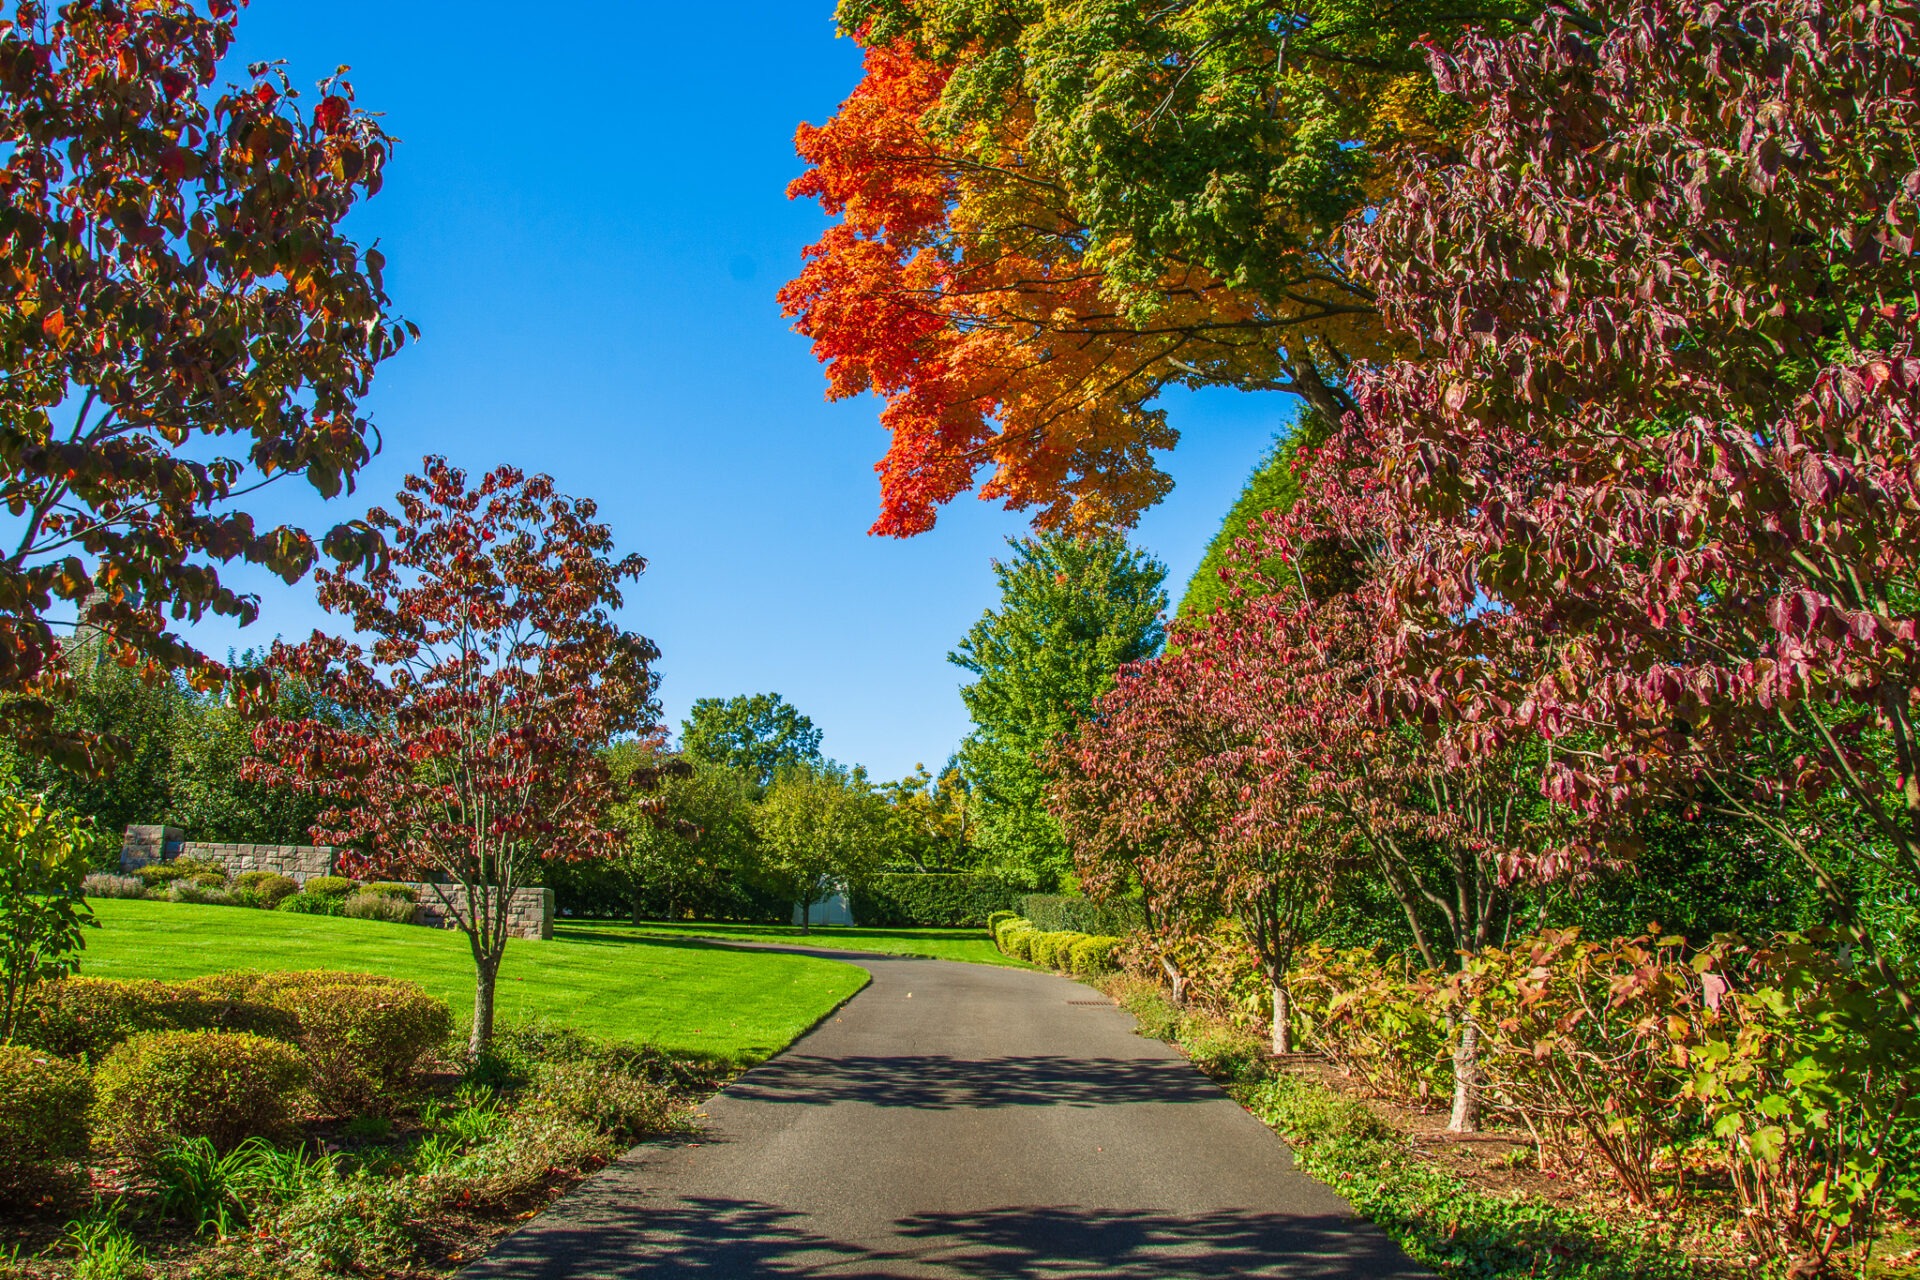 A scenic asphalt path winding through a vibrant garden with trees showcasing autumn foliage in red, orange, and green under a clear blue sky.